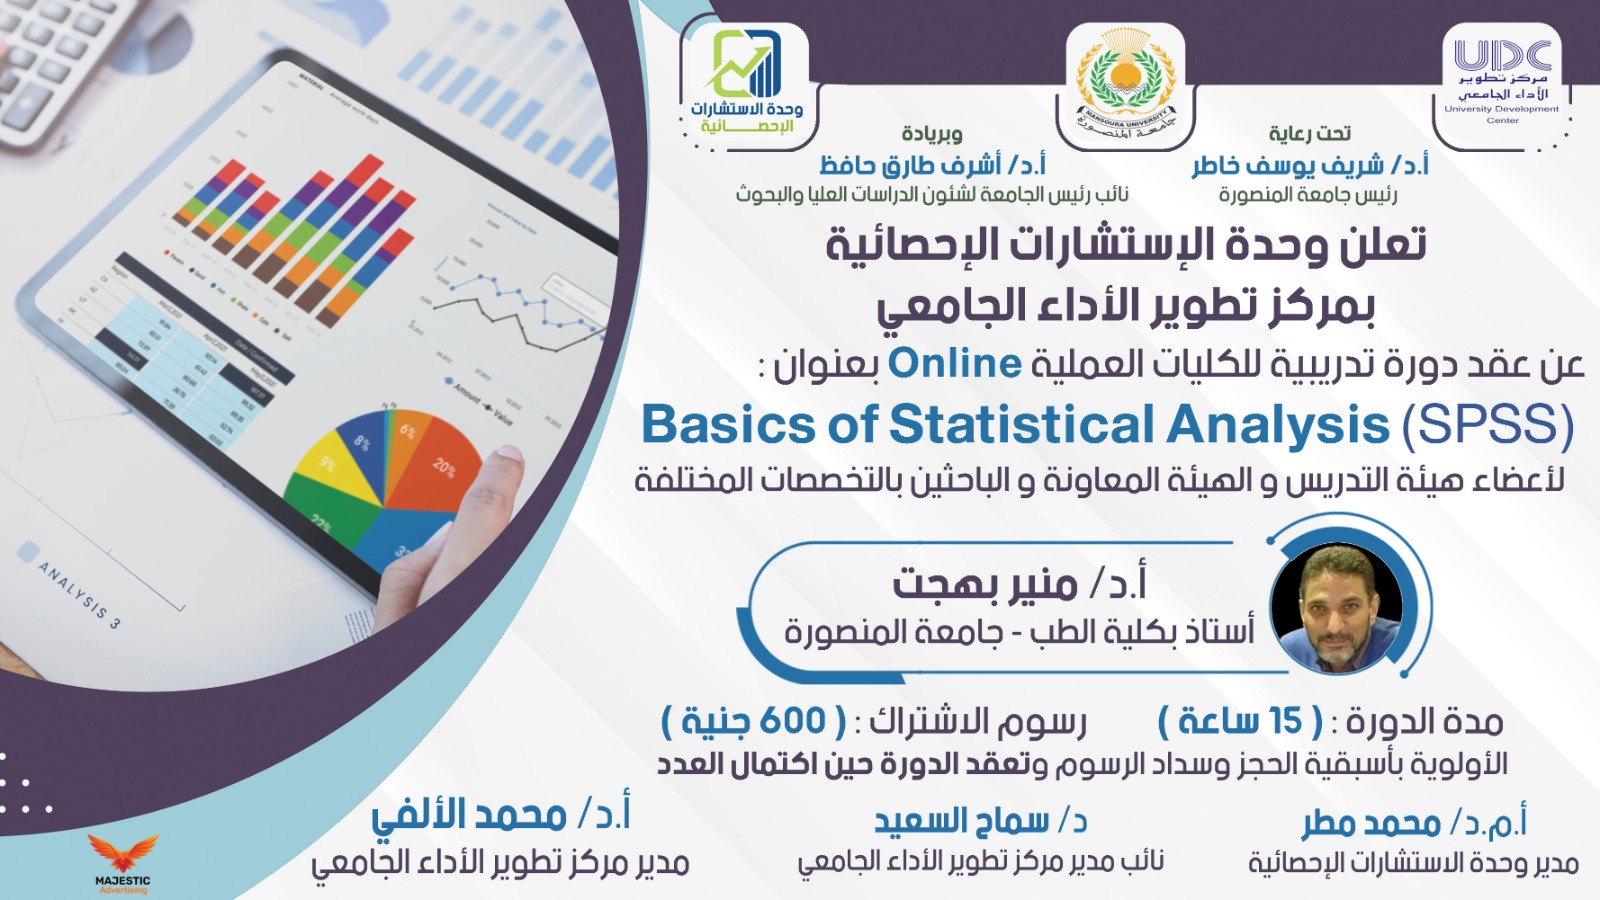 Basics of Statistical Analysis (SPSS) Online Course 